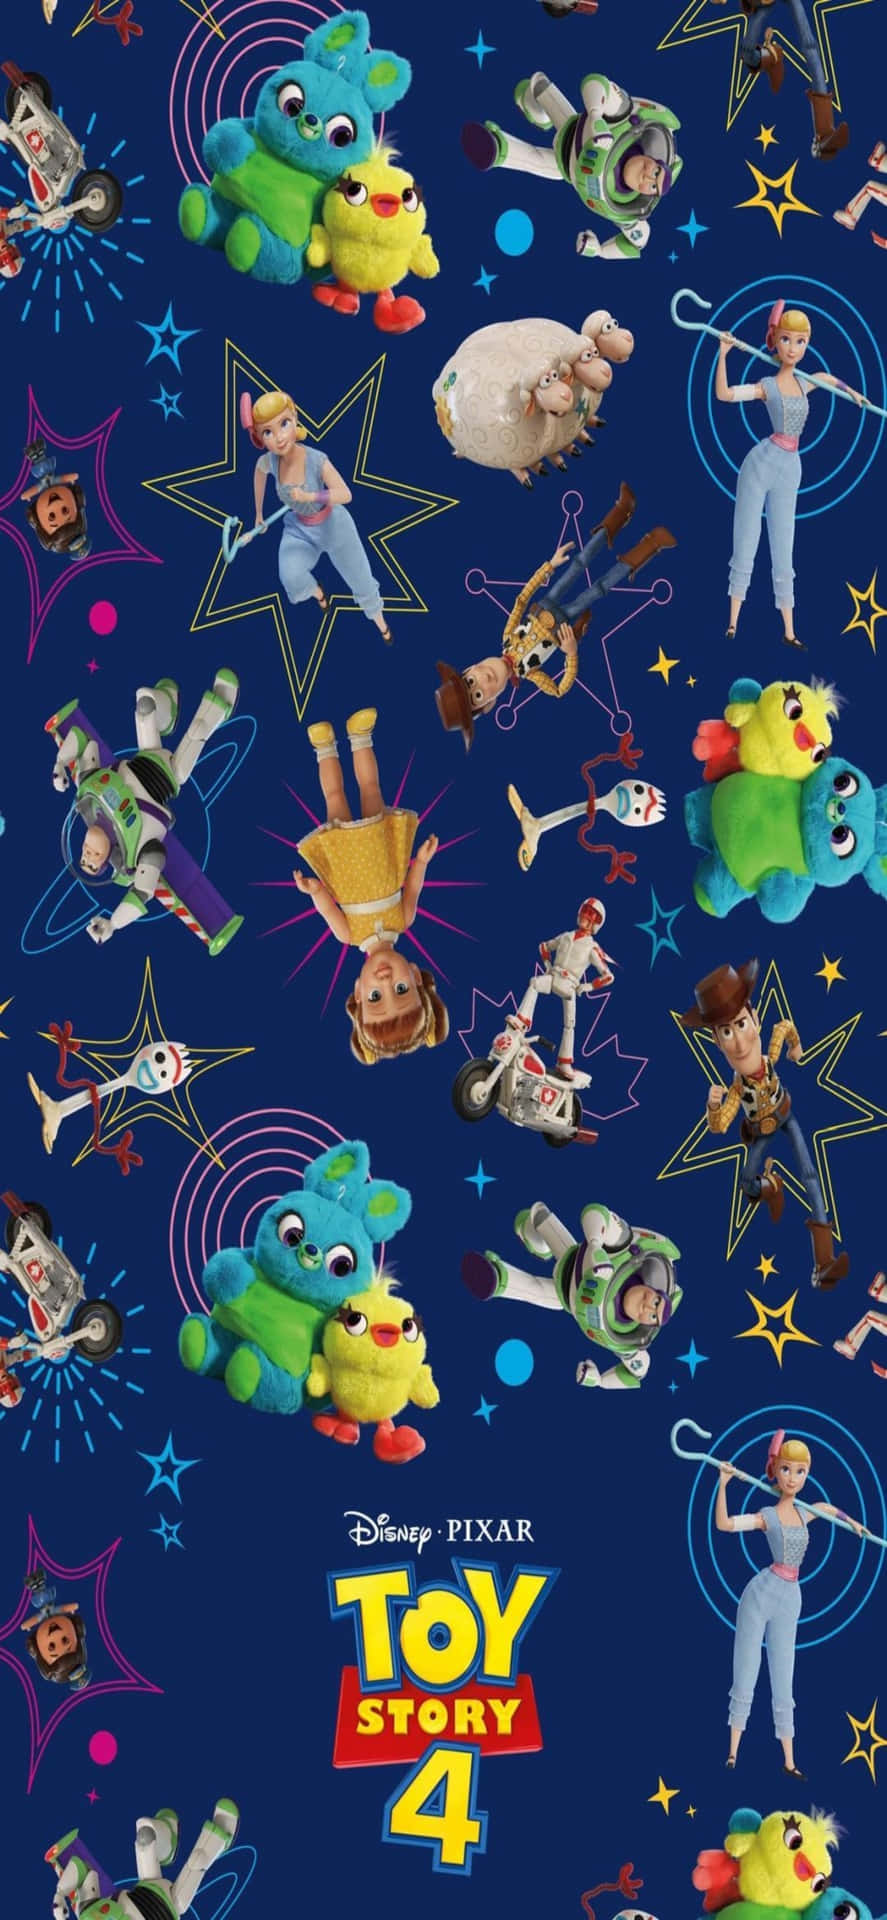 Toy Story Wallpaper Toy Story Wallpaper with the keywords Anime Buzz  Lightyear Film  Toy story Papel de parede para iphone disney Convites  temáticos toy story